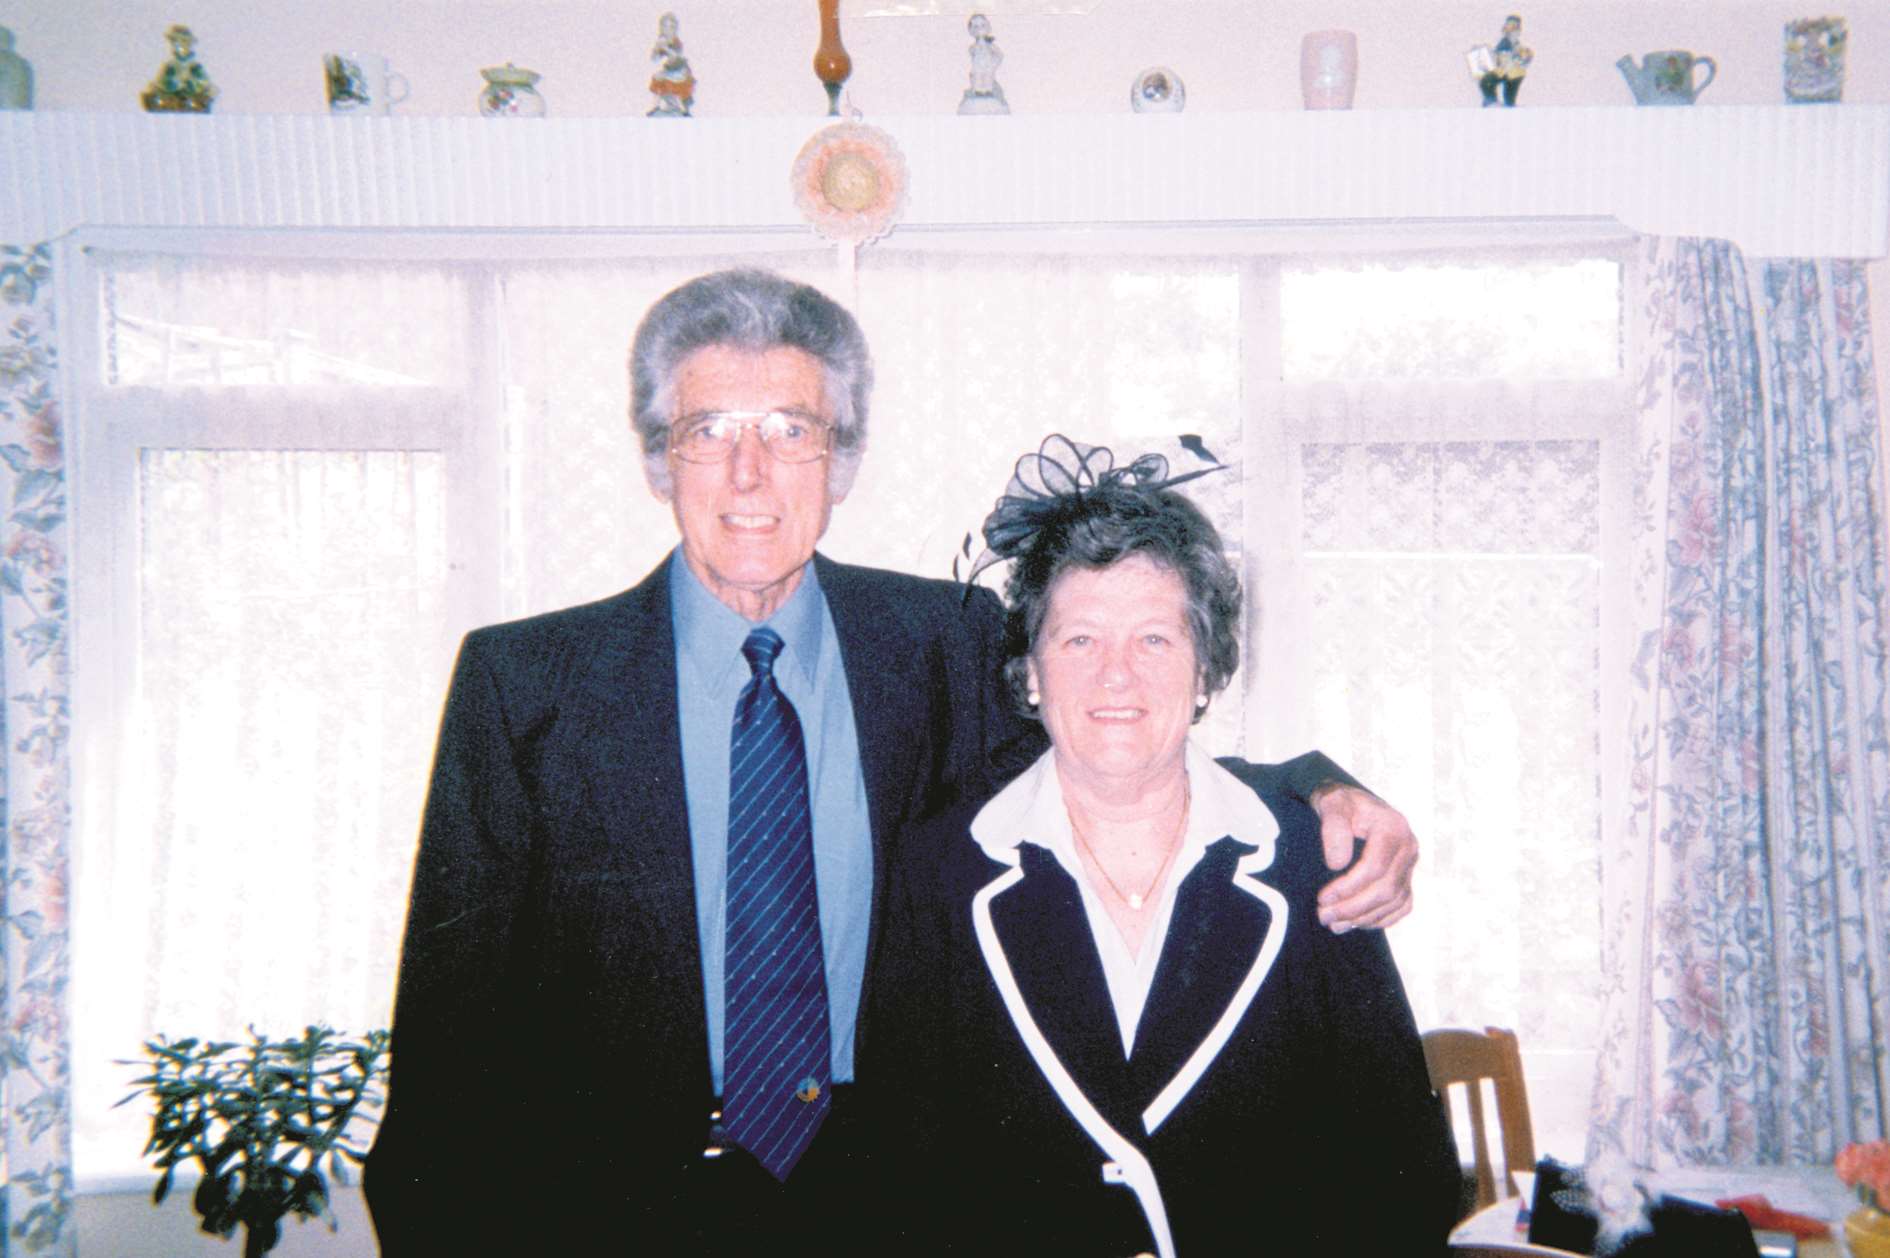 Doreen with her husband Stanley, who was hit by a car and killed in January 2014